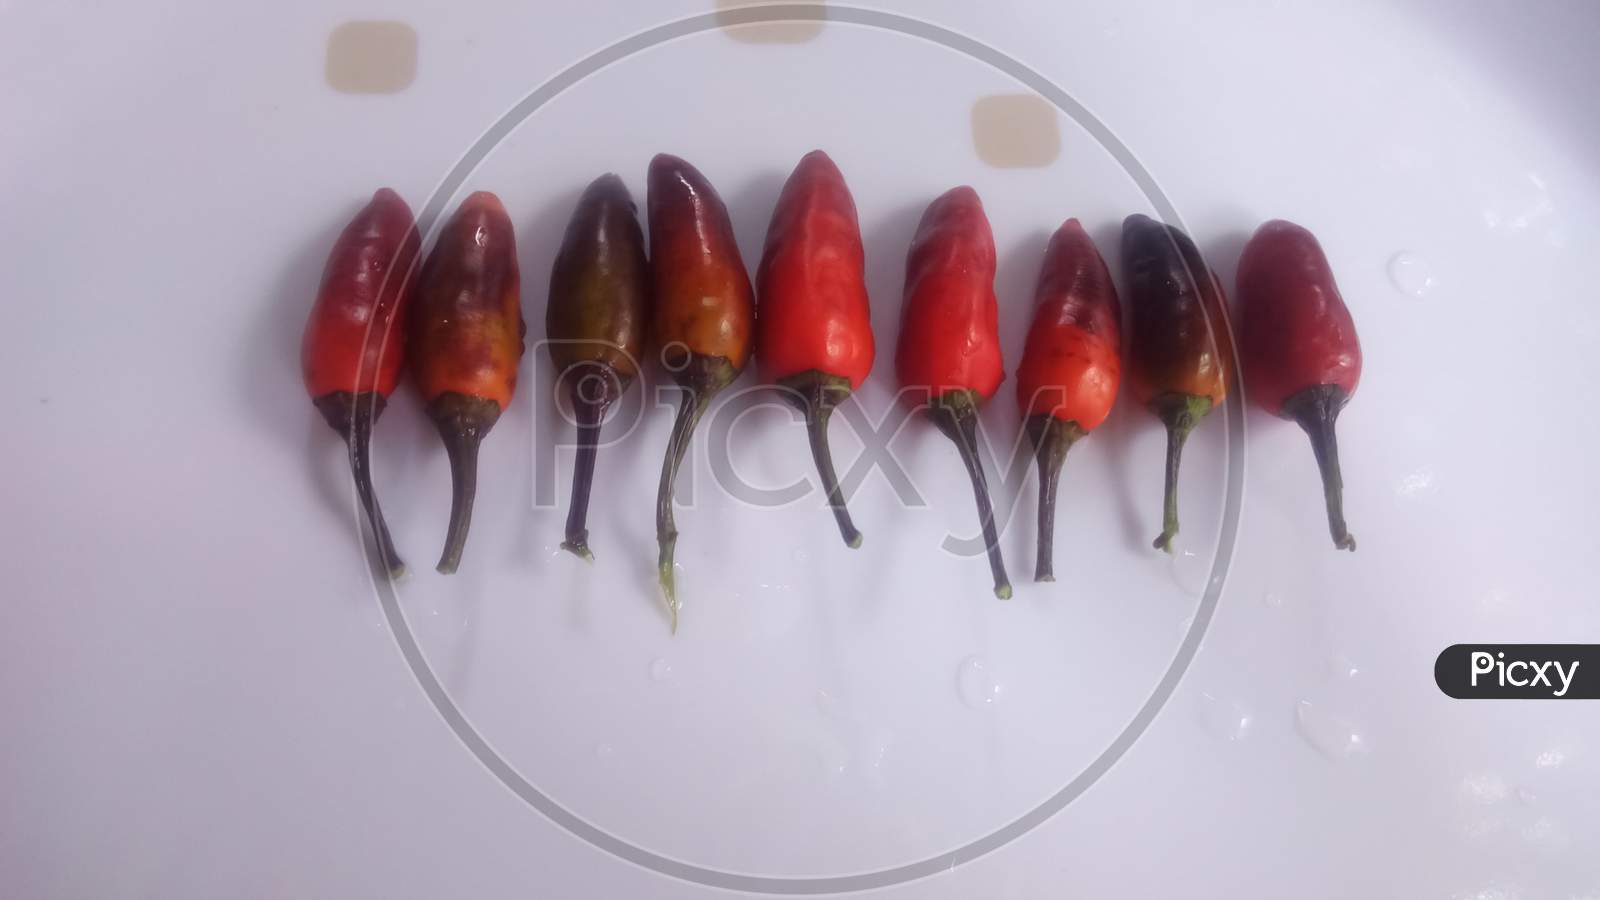 Jalapeno chilli peppers